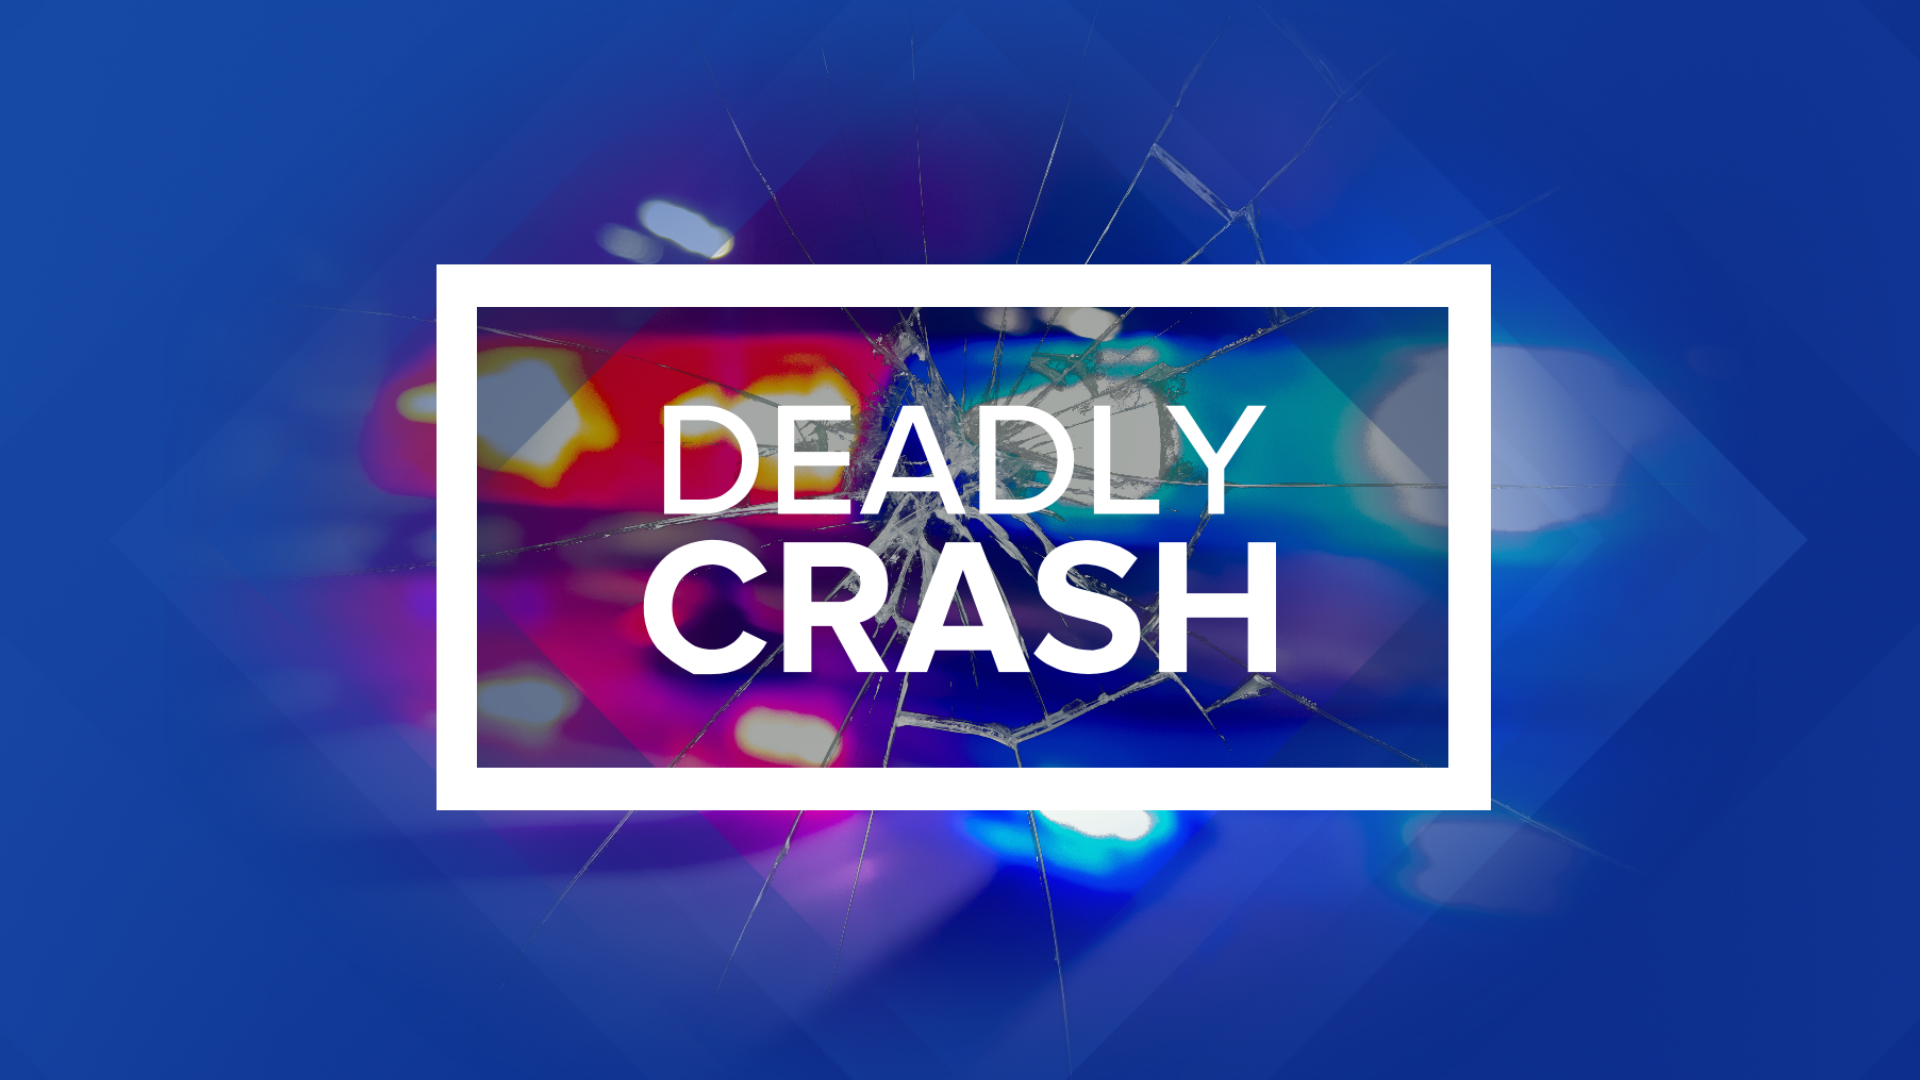 The crash happened just after 1 p.m. Saturday at the intersection of 895 and Route 61 in Deer Lake.